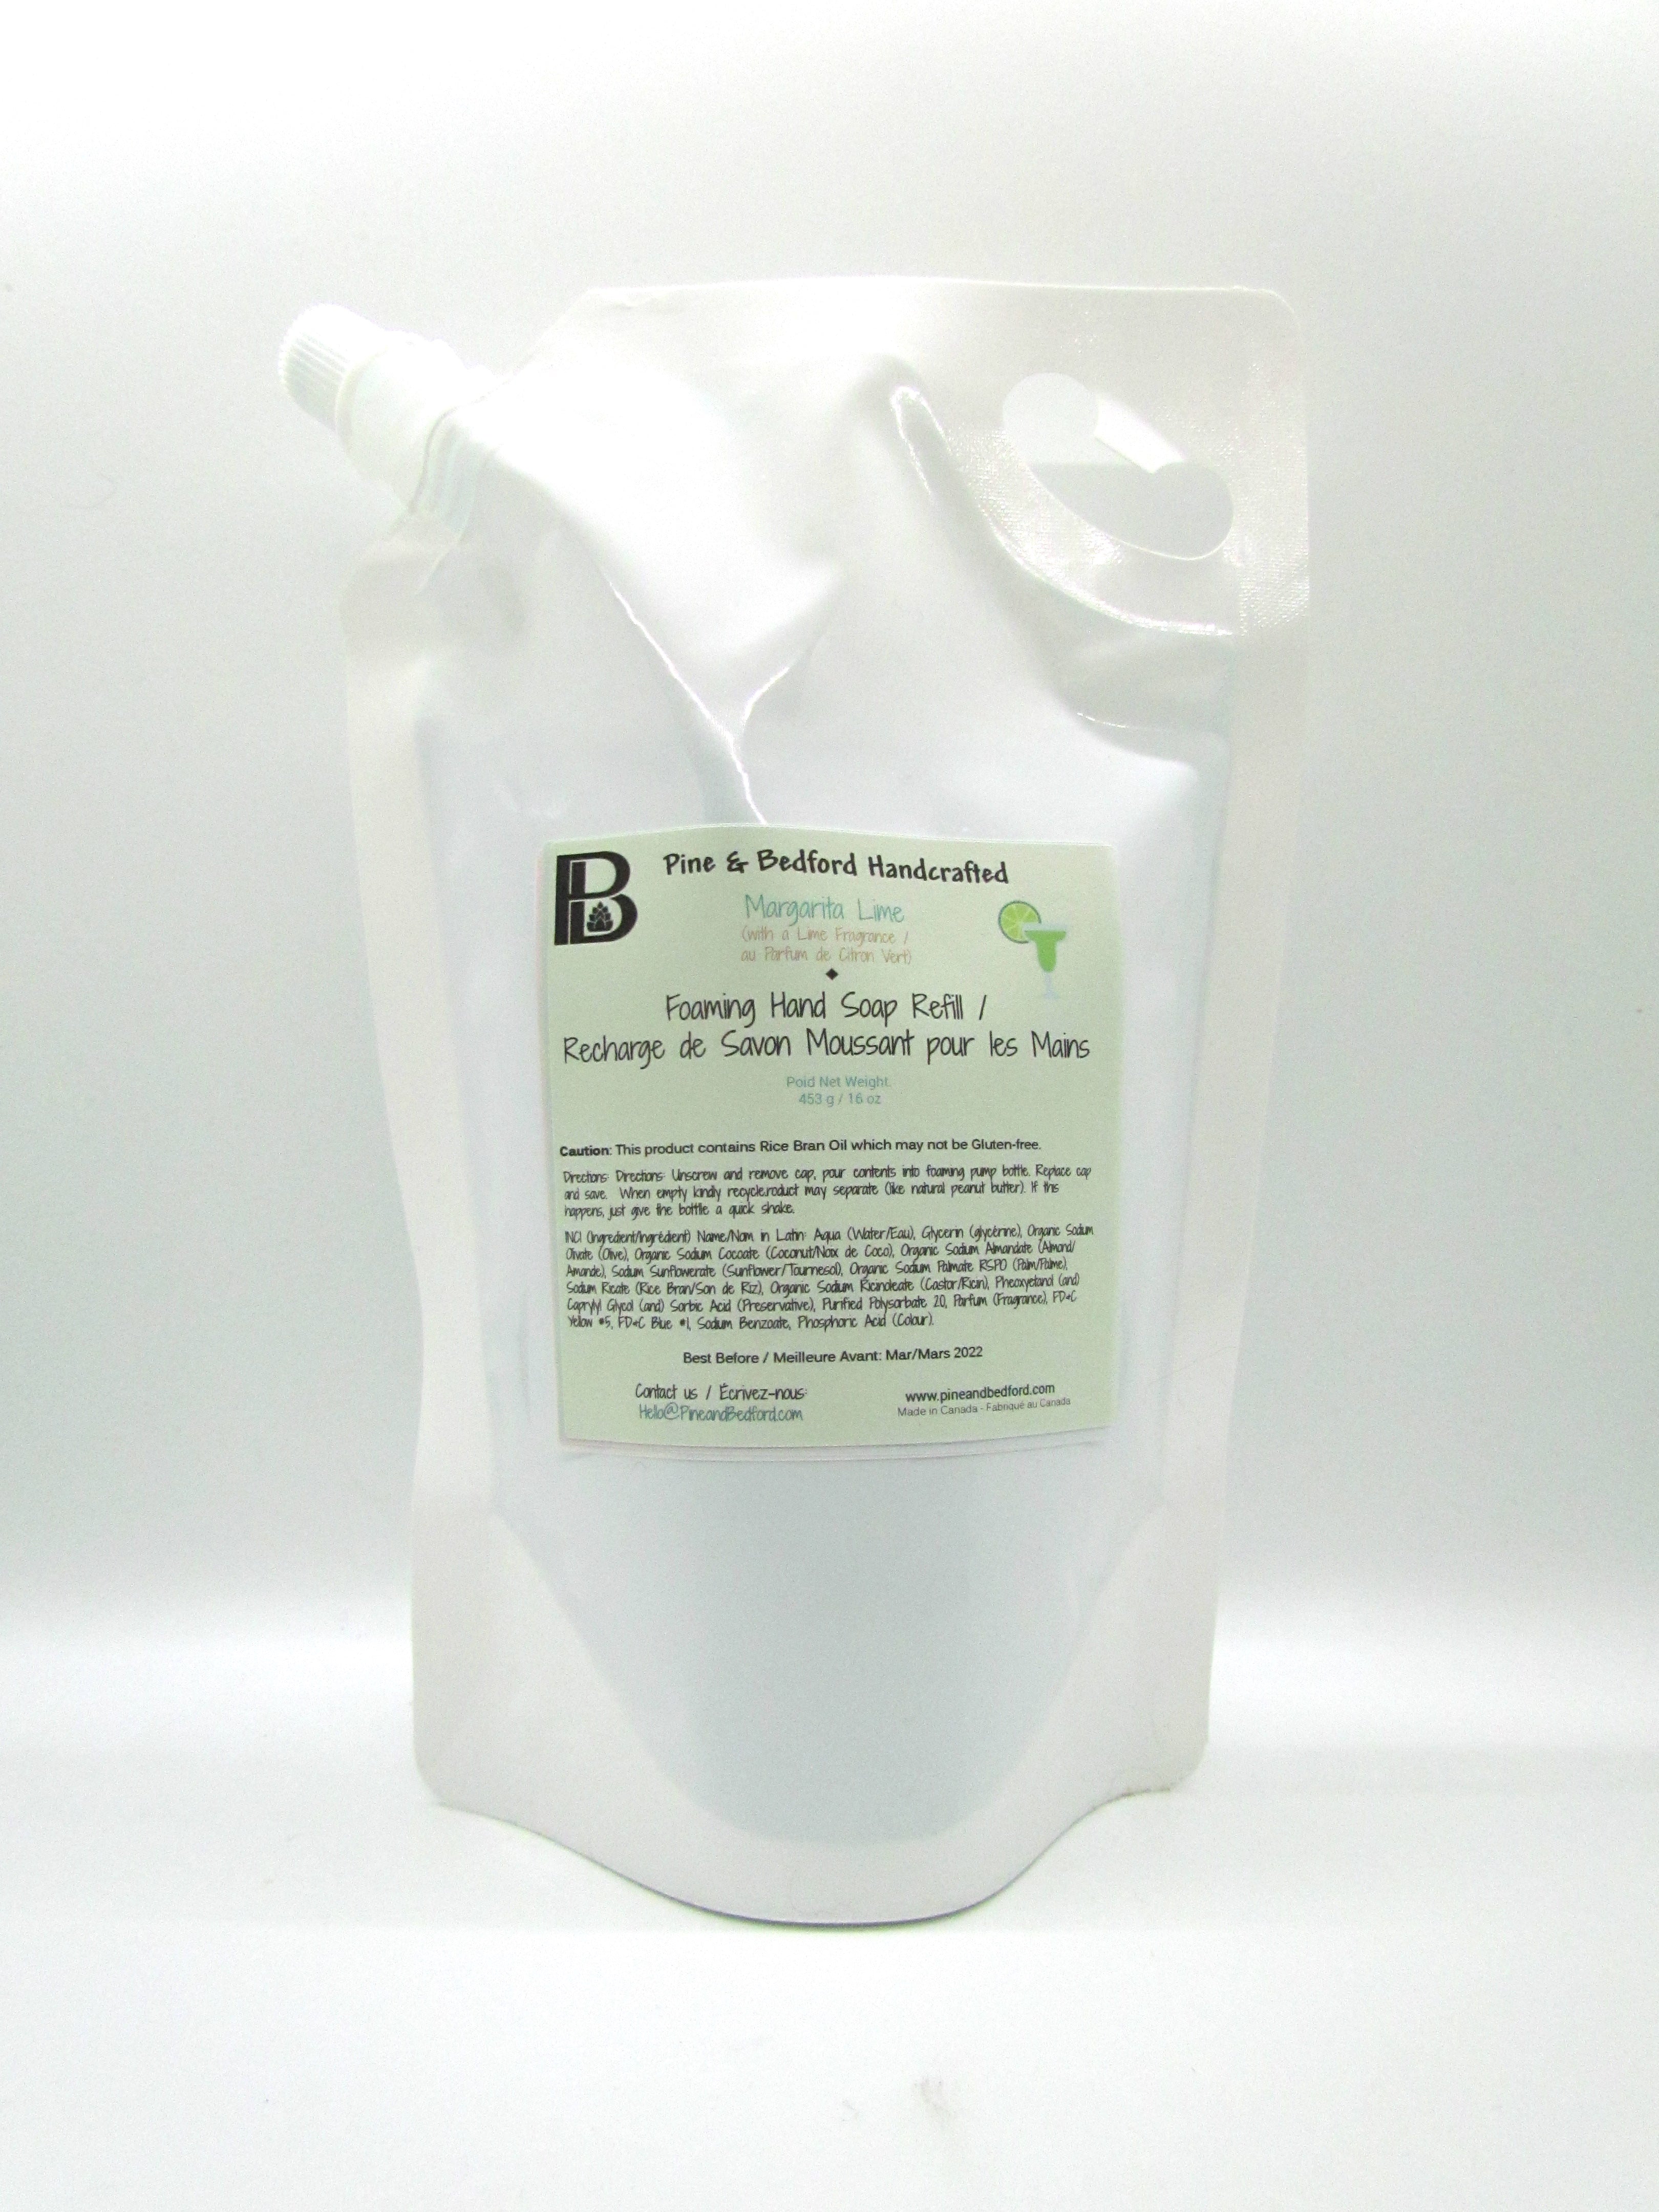 Pine & Bedford's Foaming Hand Soap Refill Pack is made from real soap not detergent, and is available in a variety of Fragrances and Essential Oils. Margarita Refill Pack is shown here.  